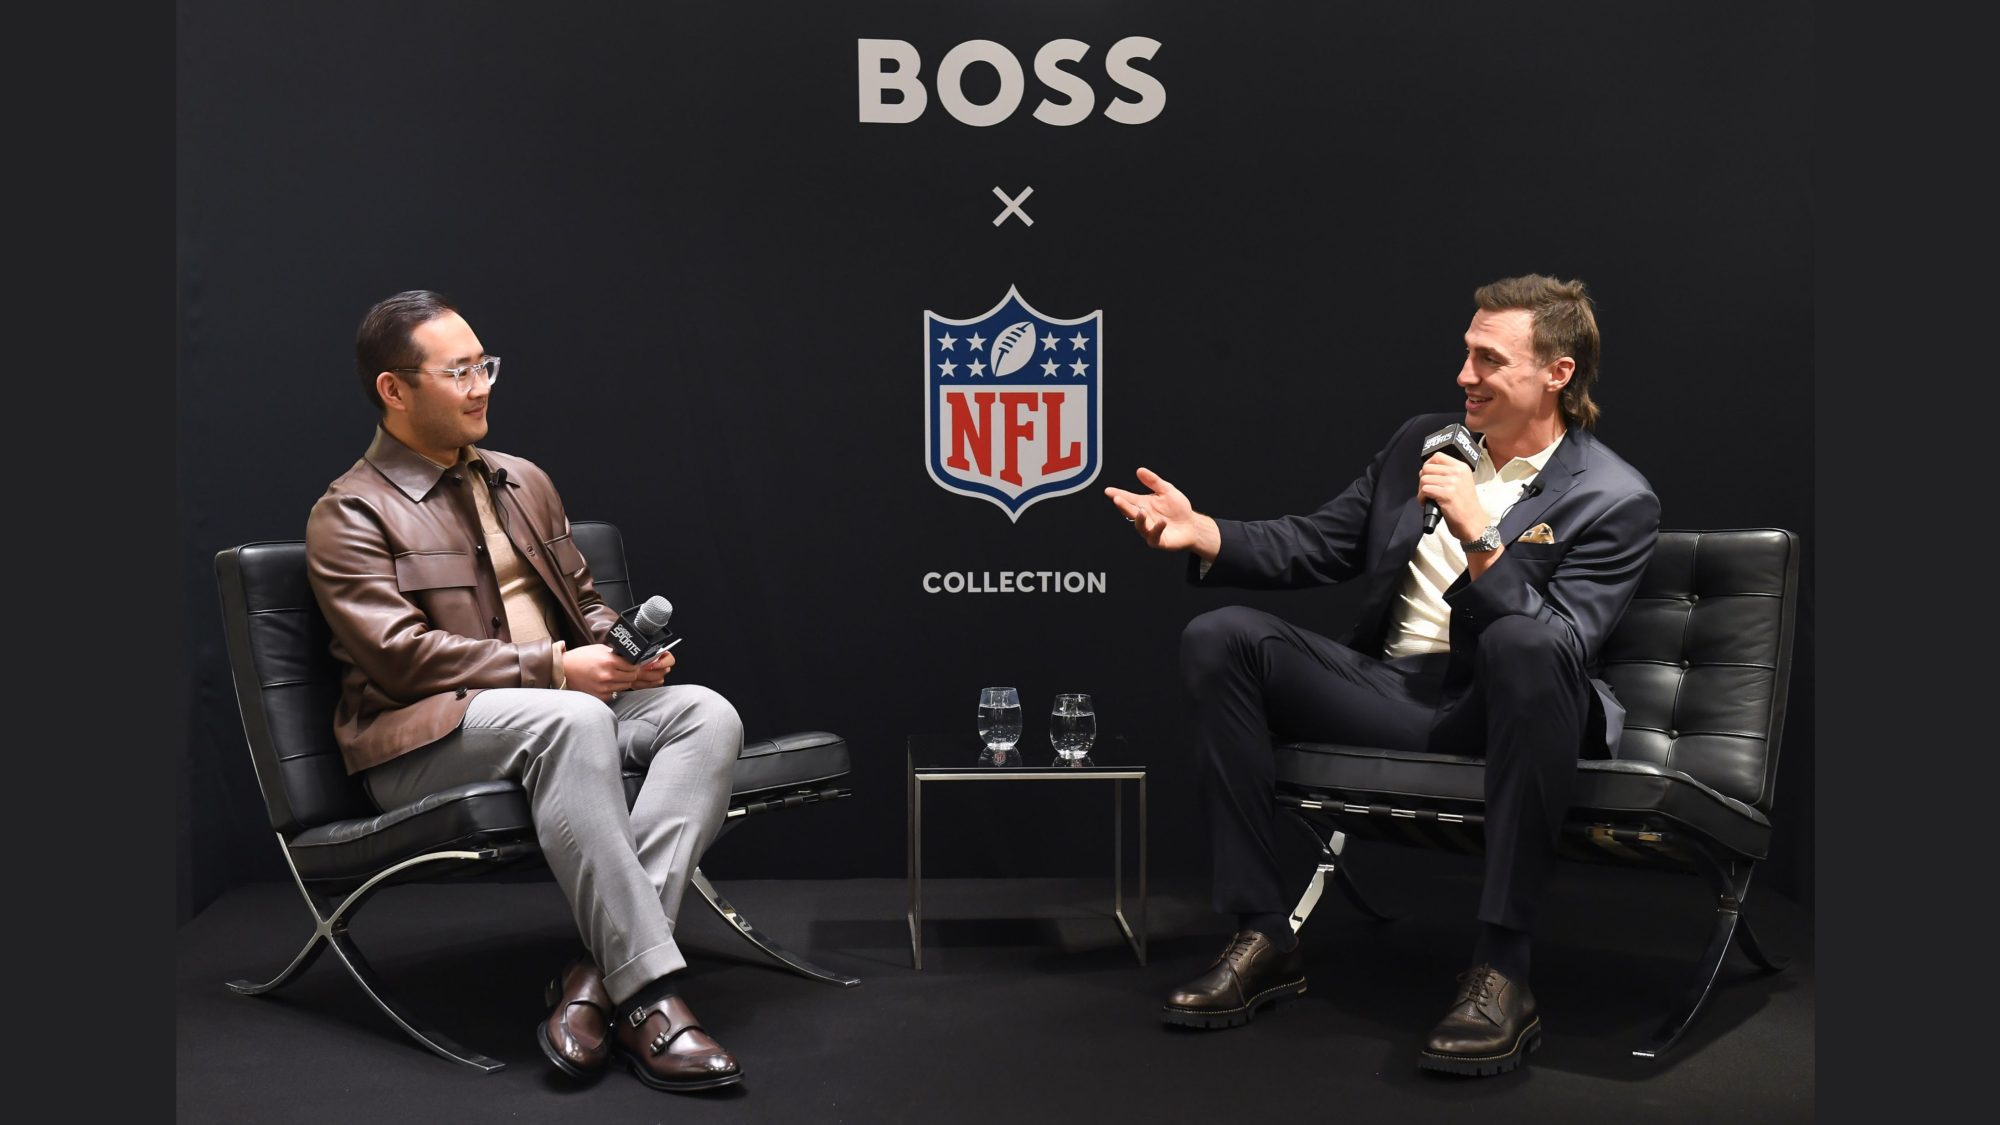 GLORY Sports Editor Lance Chung is seated on a stage sitting opposite former NFL pro Luke Willson with a BOSS and NFL backdrop as they speak in a Q&A together.